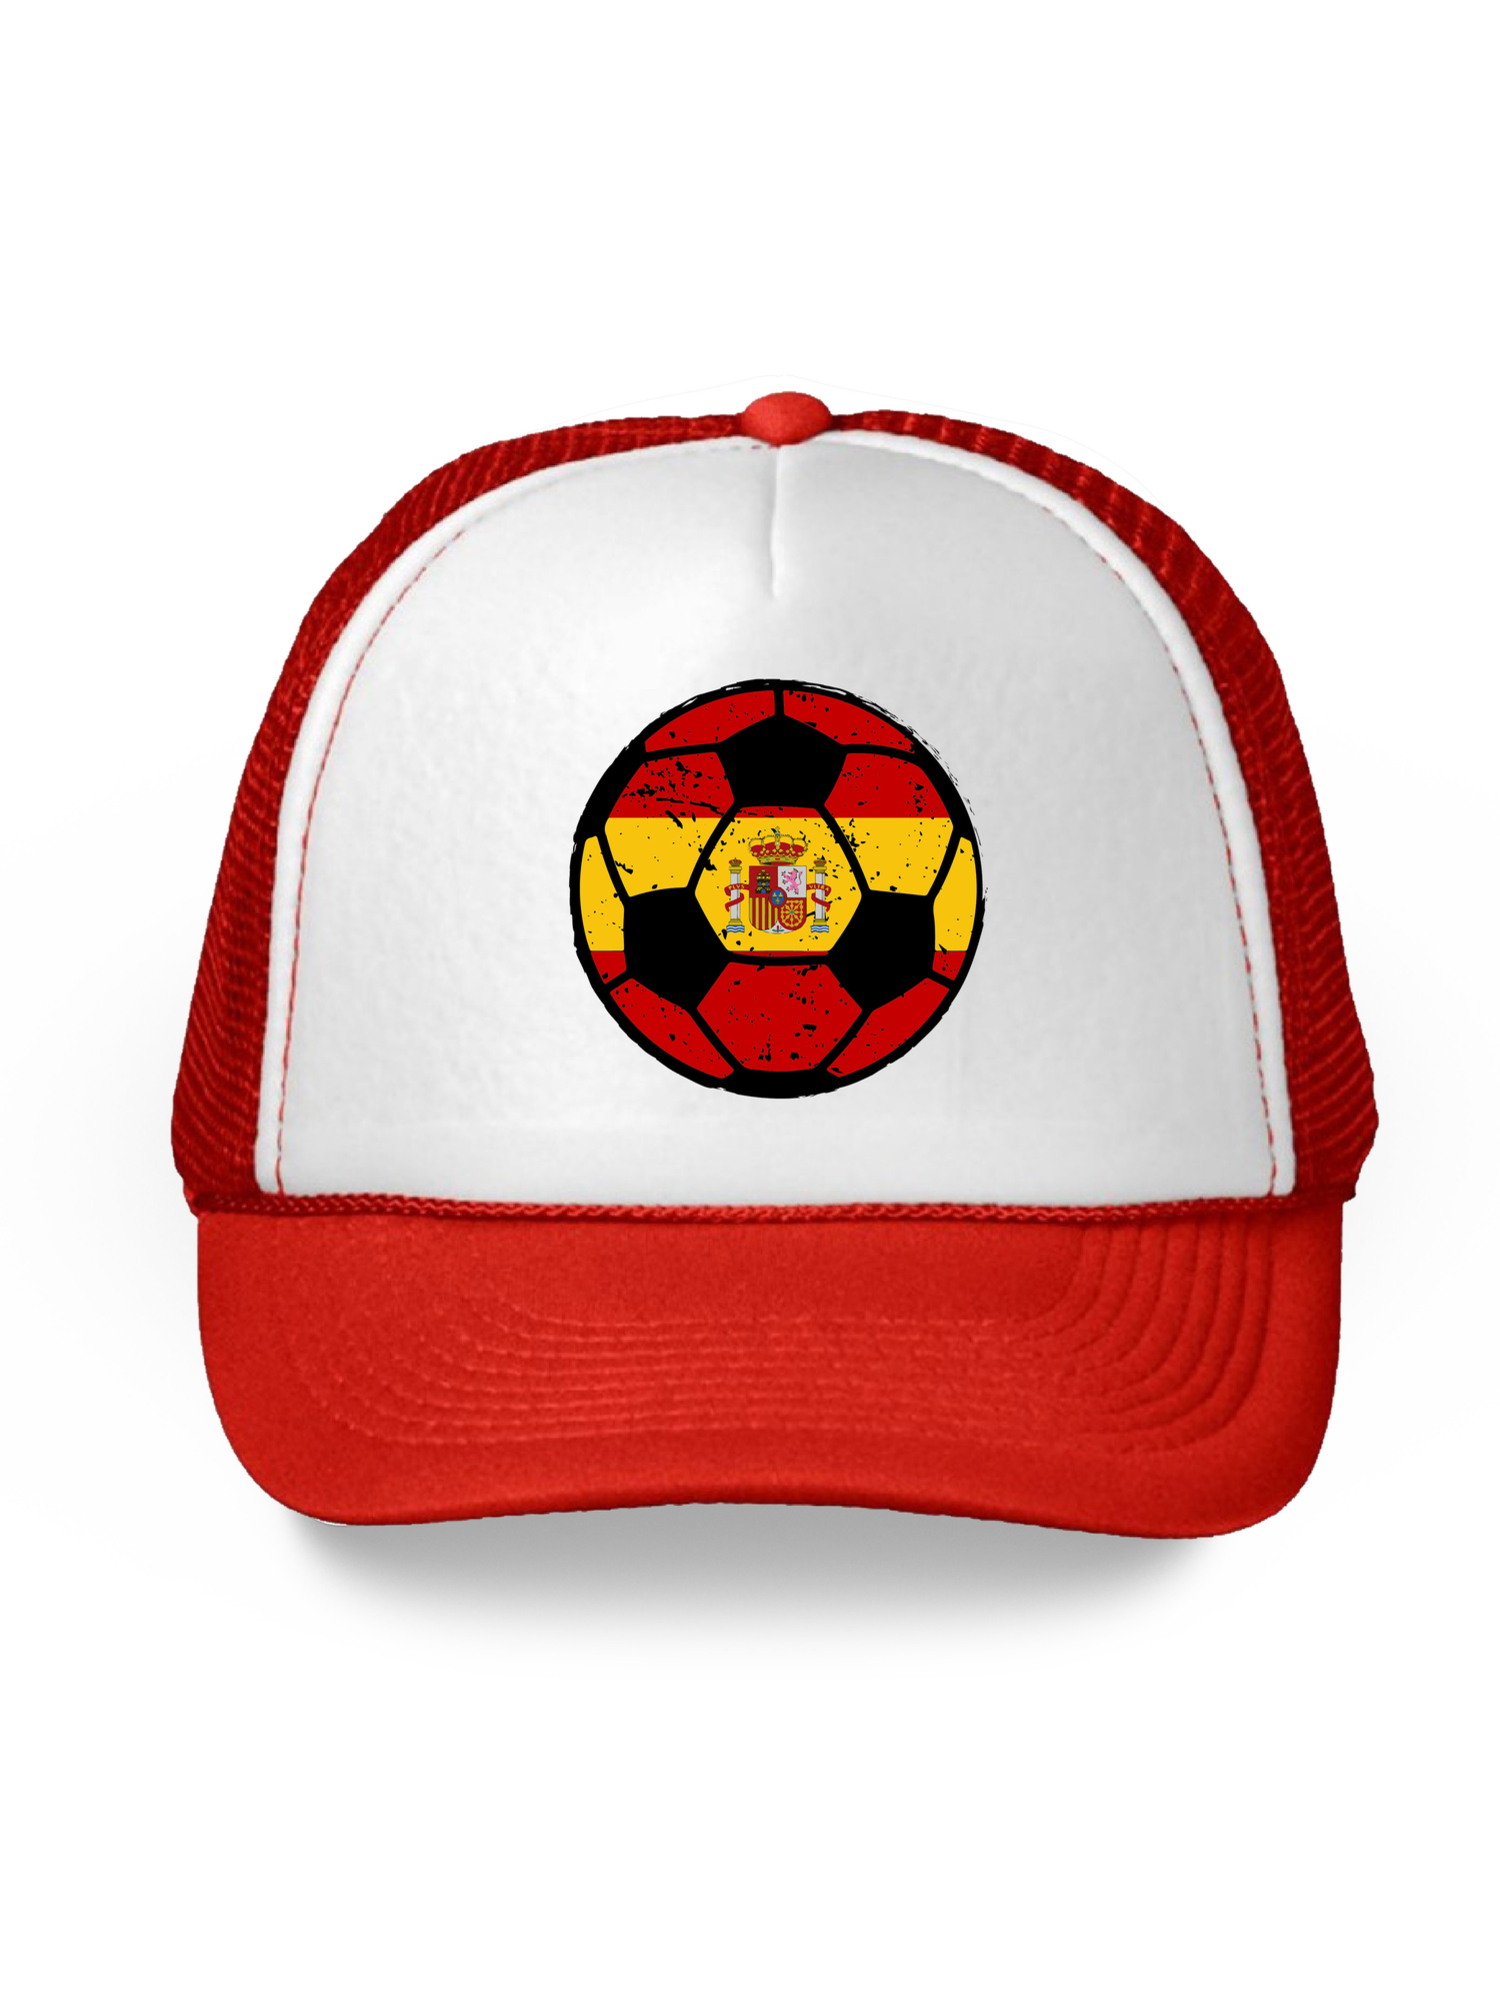 Awkward Styles Spain Soccer Ball Hat Spanish Soccer Trucker Hat Spain 2018 Baseball Cap Spain Trucker Hats for Men and Women Hat Gifts from Spain Spanish Baseball Hats Spanish Flag Trucker Hat - image 1 of 6